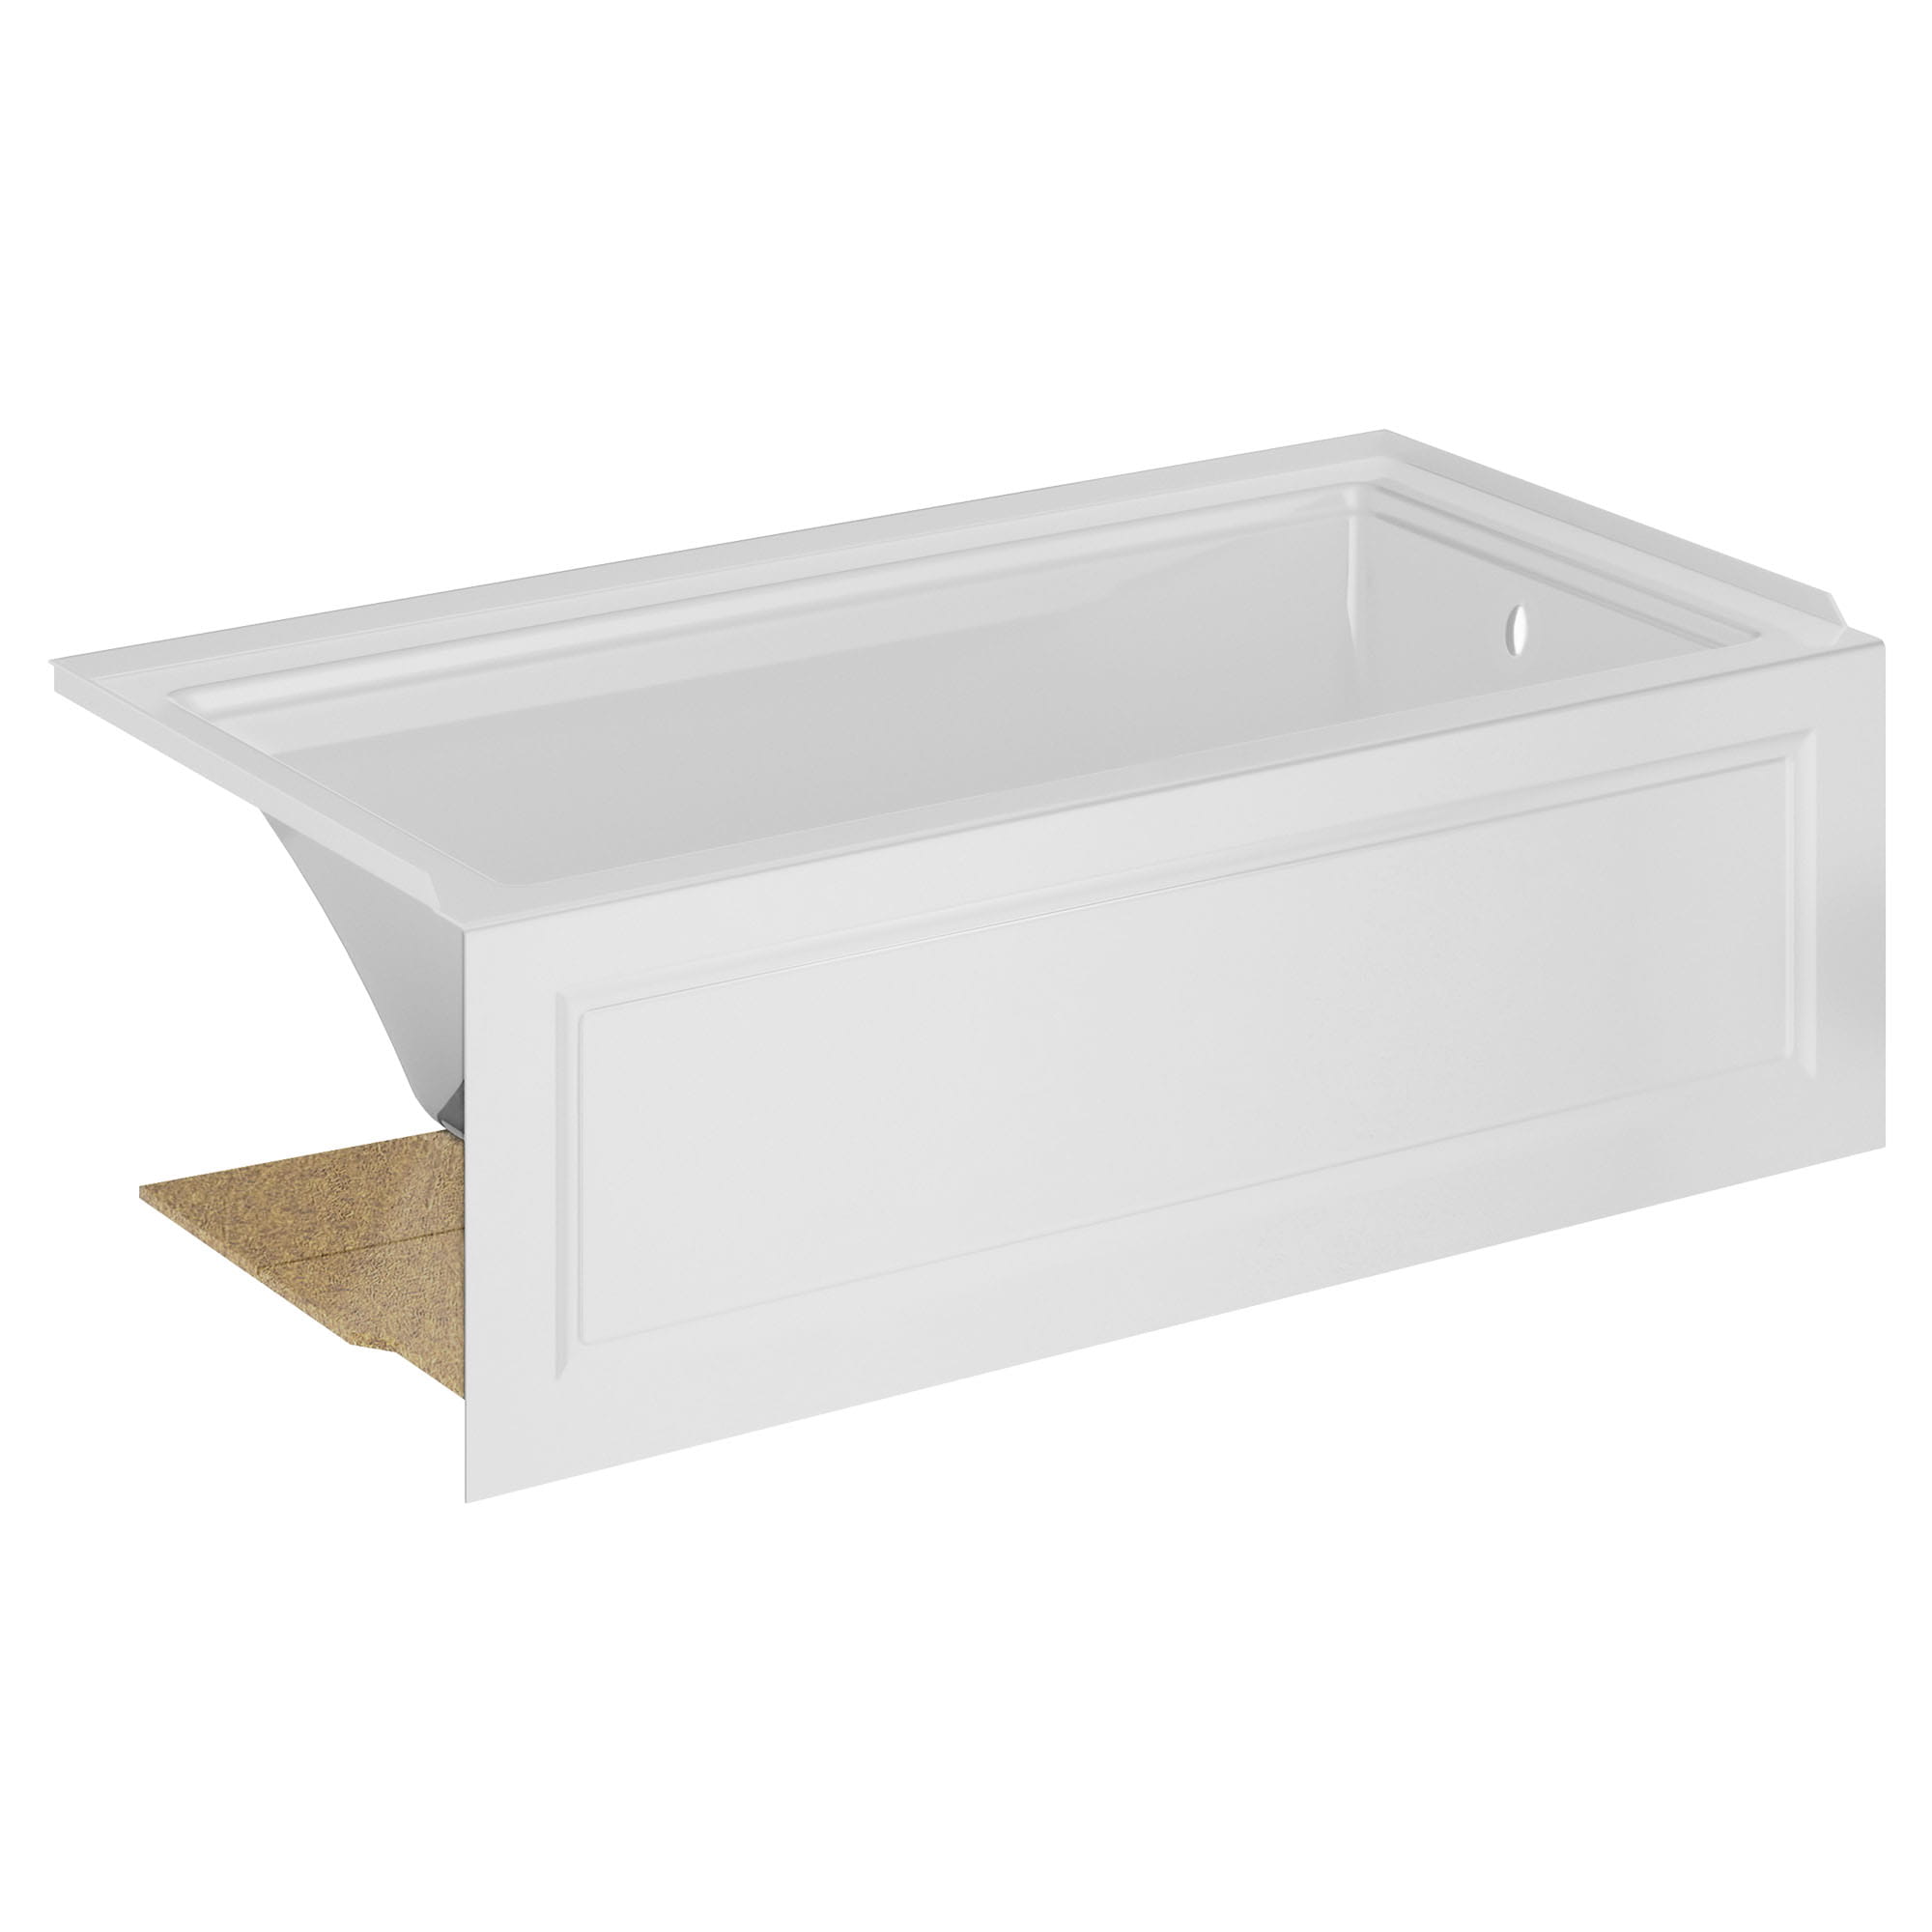 Town Square S 60 x 32 Inch Integral Apron Bathtub With Right Hand Outlet WHITE